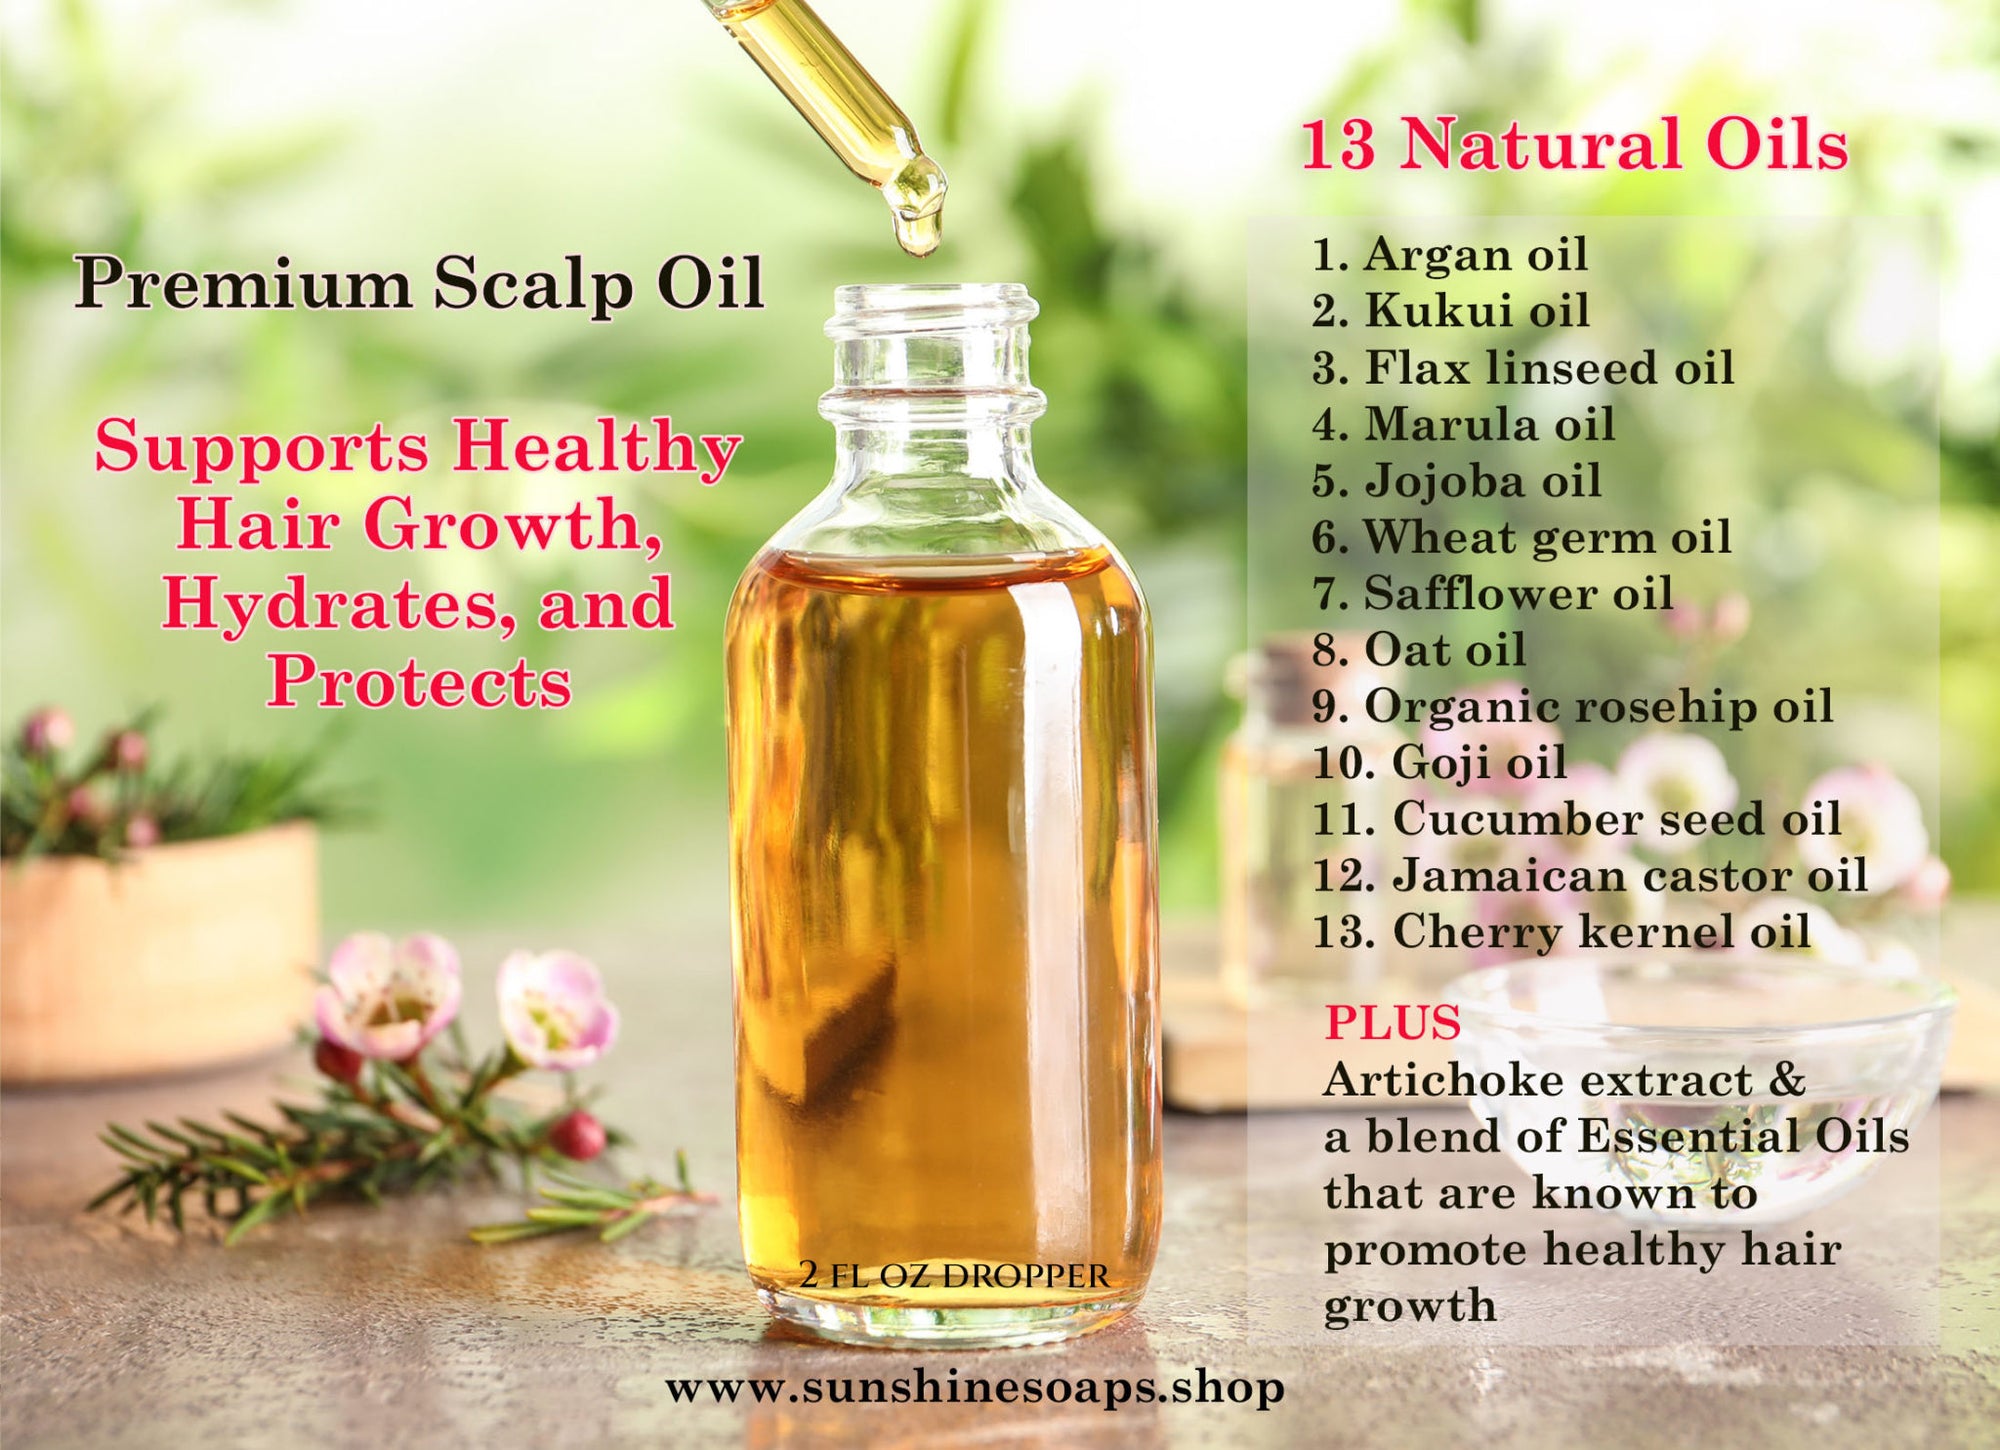 Scalp Care Oil – All Natural – Hydrating Scalp Oil w/Essential Oils